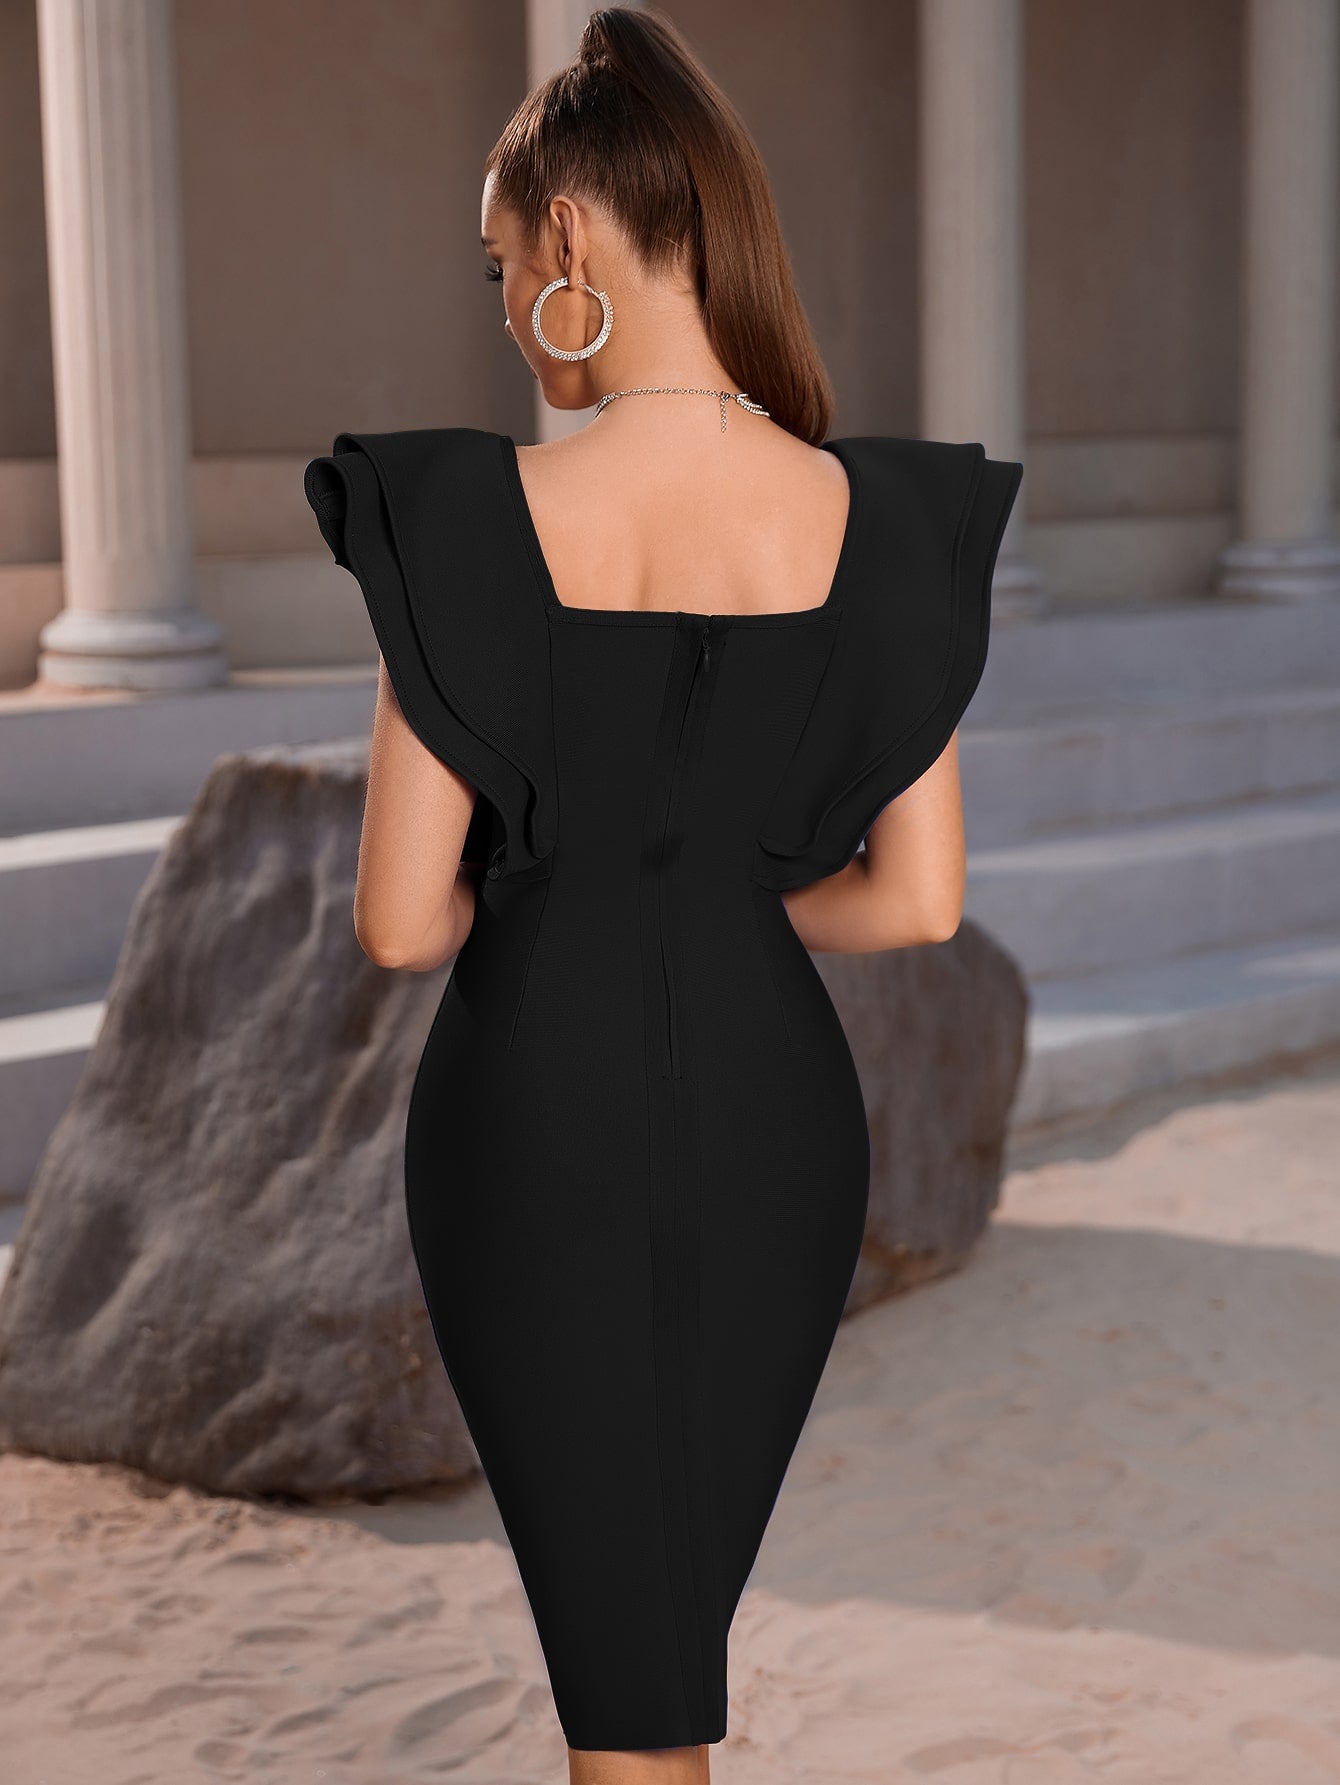 LLstyle- Neck Backless Ruffle Trim Cocktail Party Bandage Bodycon Dress